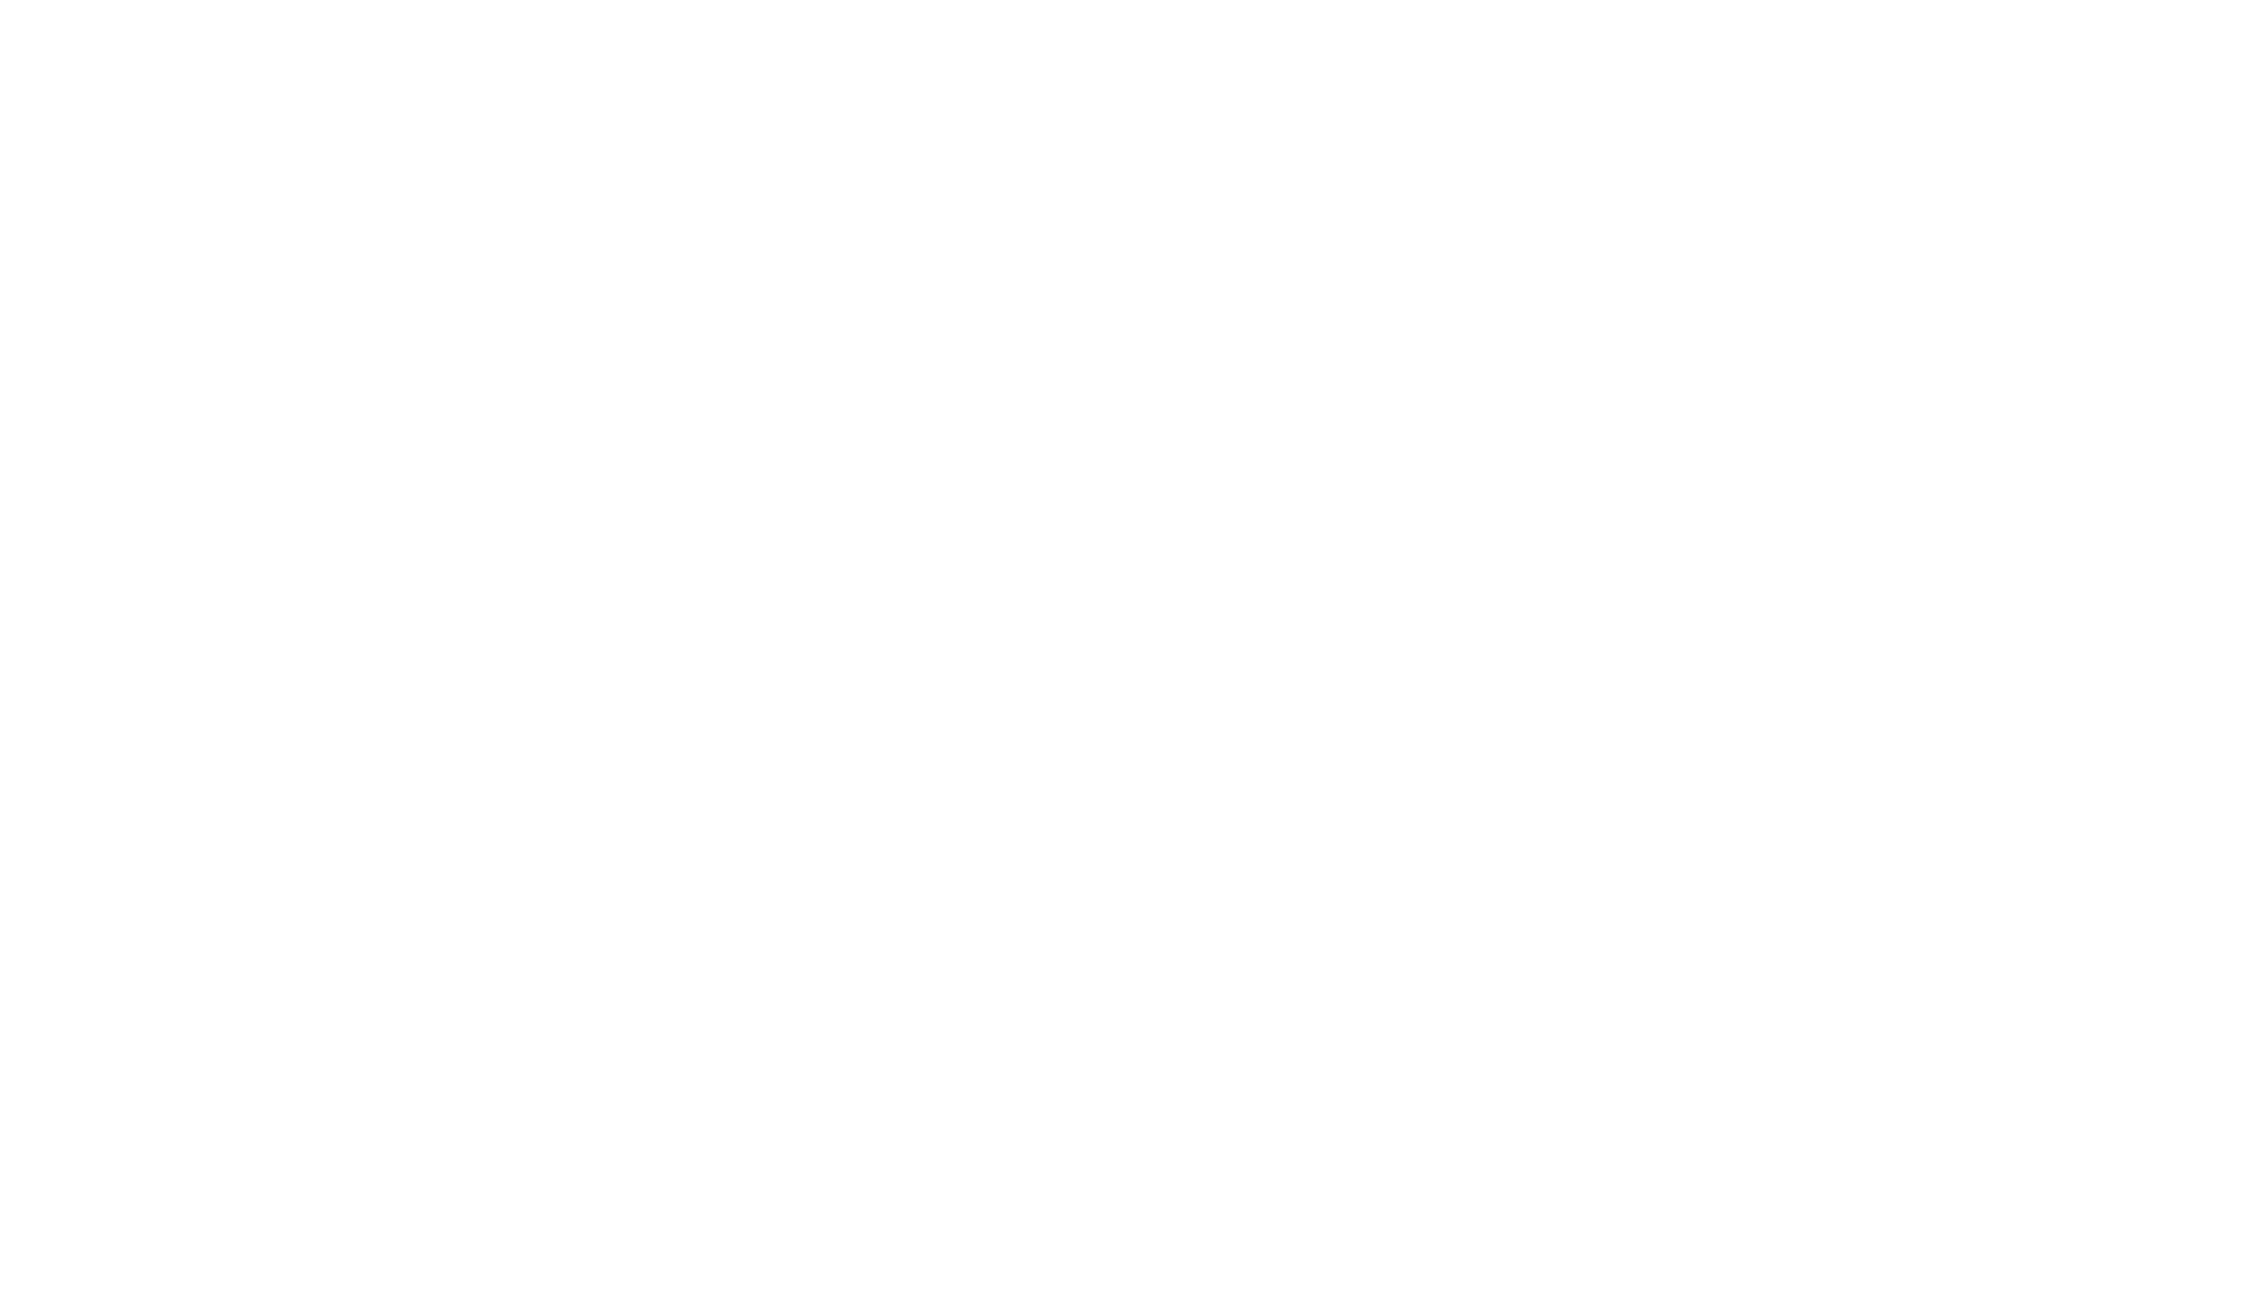 The Man Who Fell to Earth logo